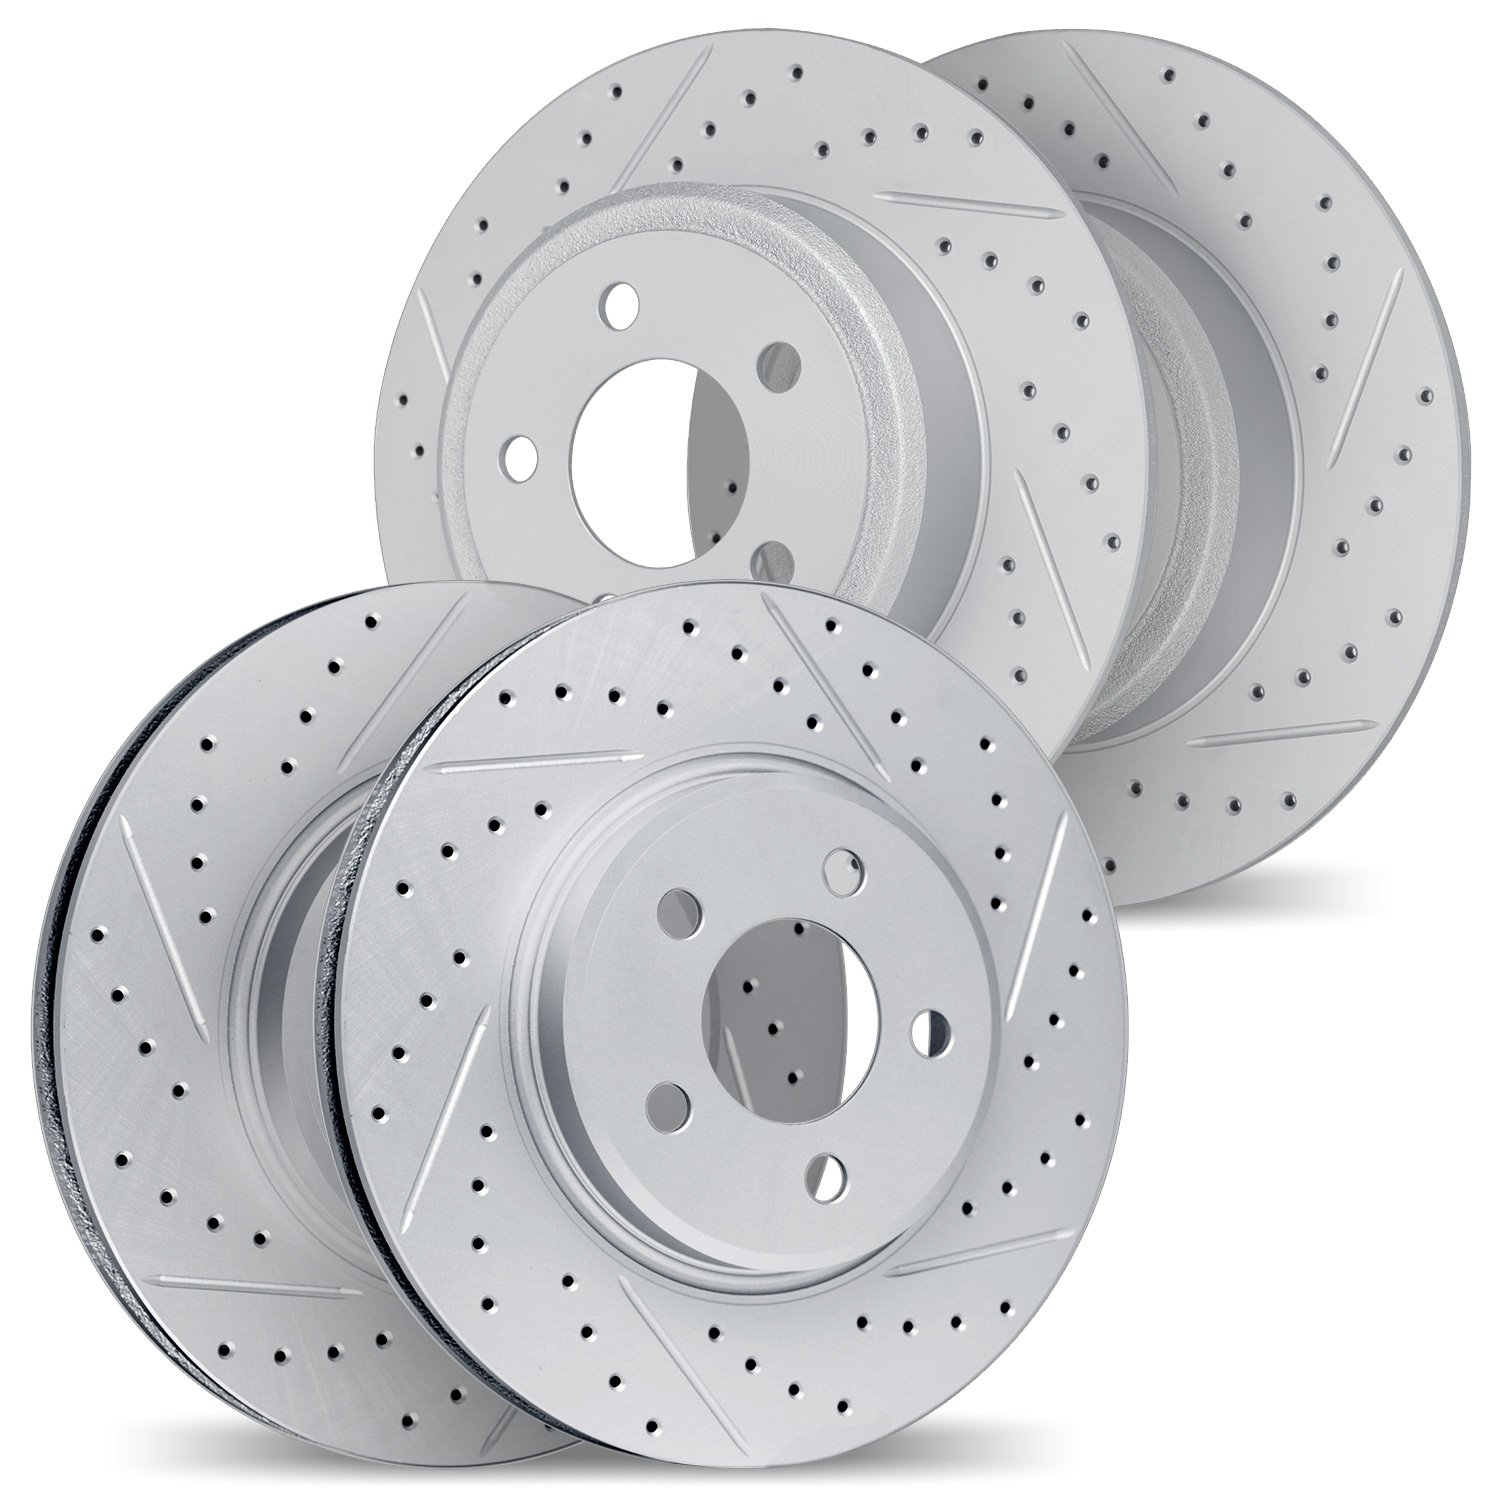 2004-45026 Geoperformance Drilled/Slotted Brake Rotors, 1998-2005 GM, Position: Front and Rear